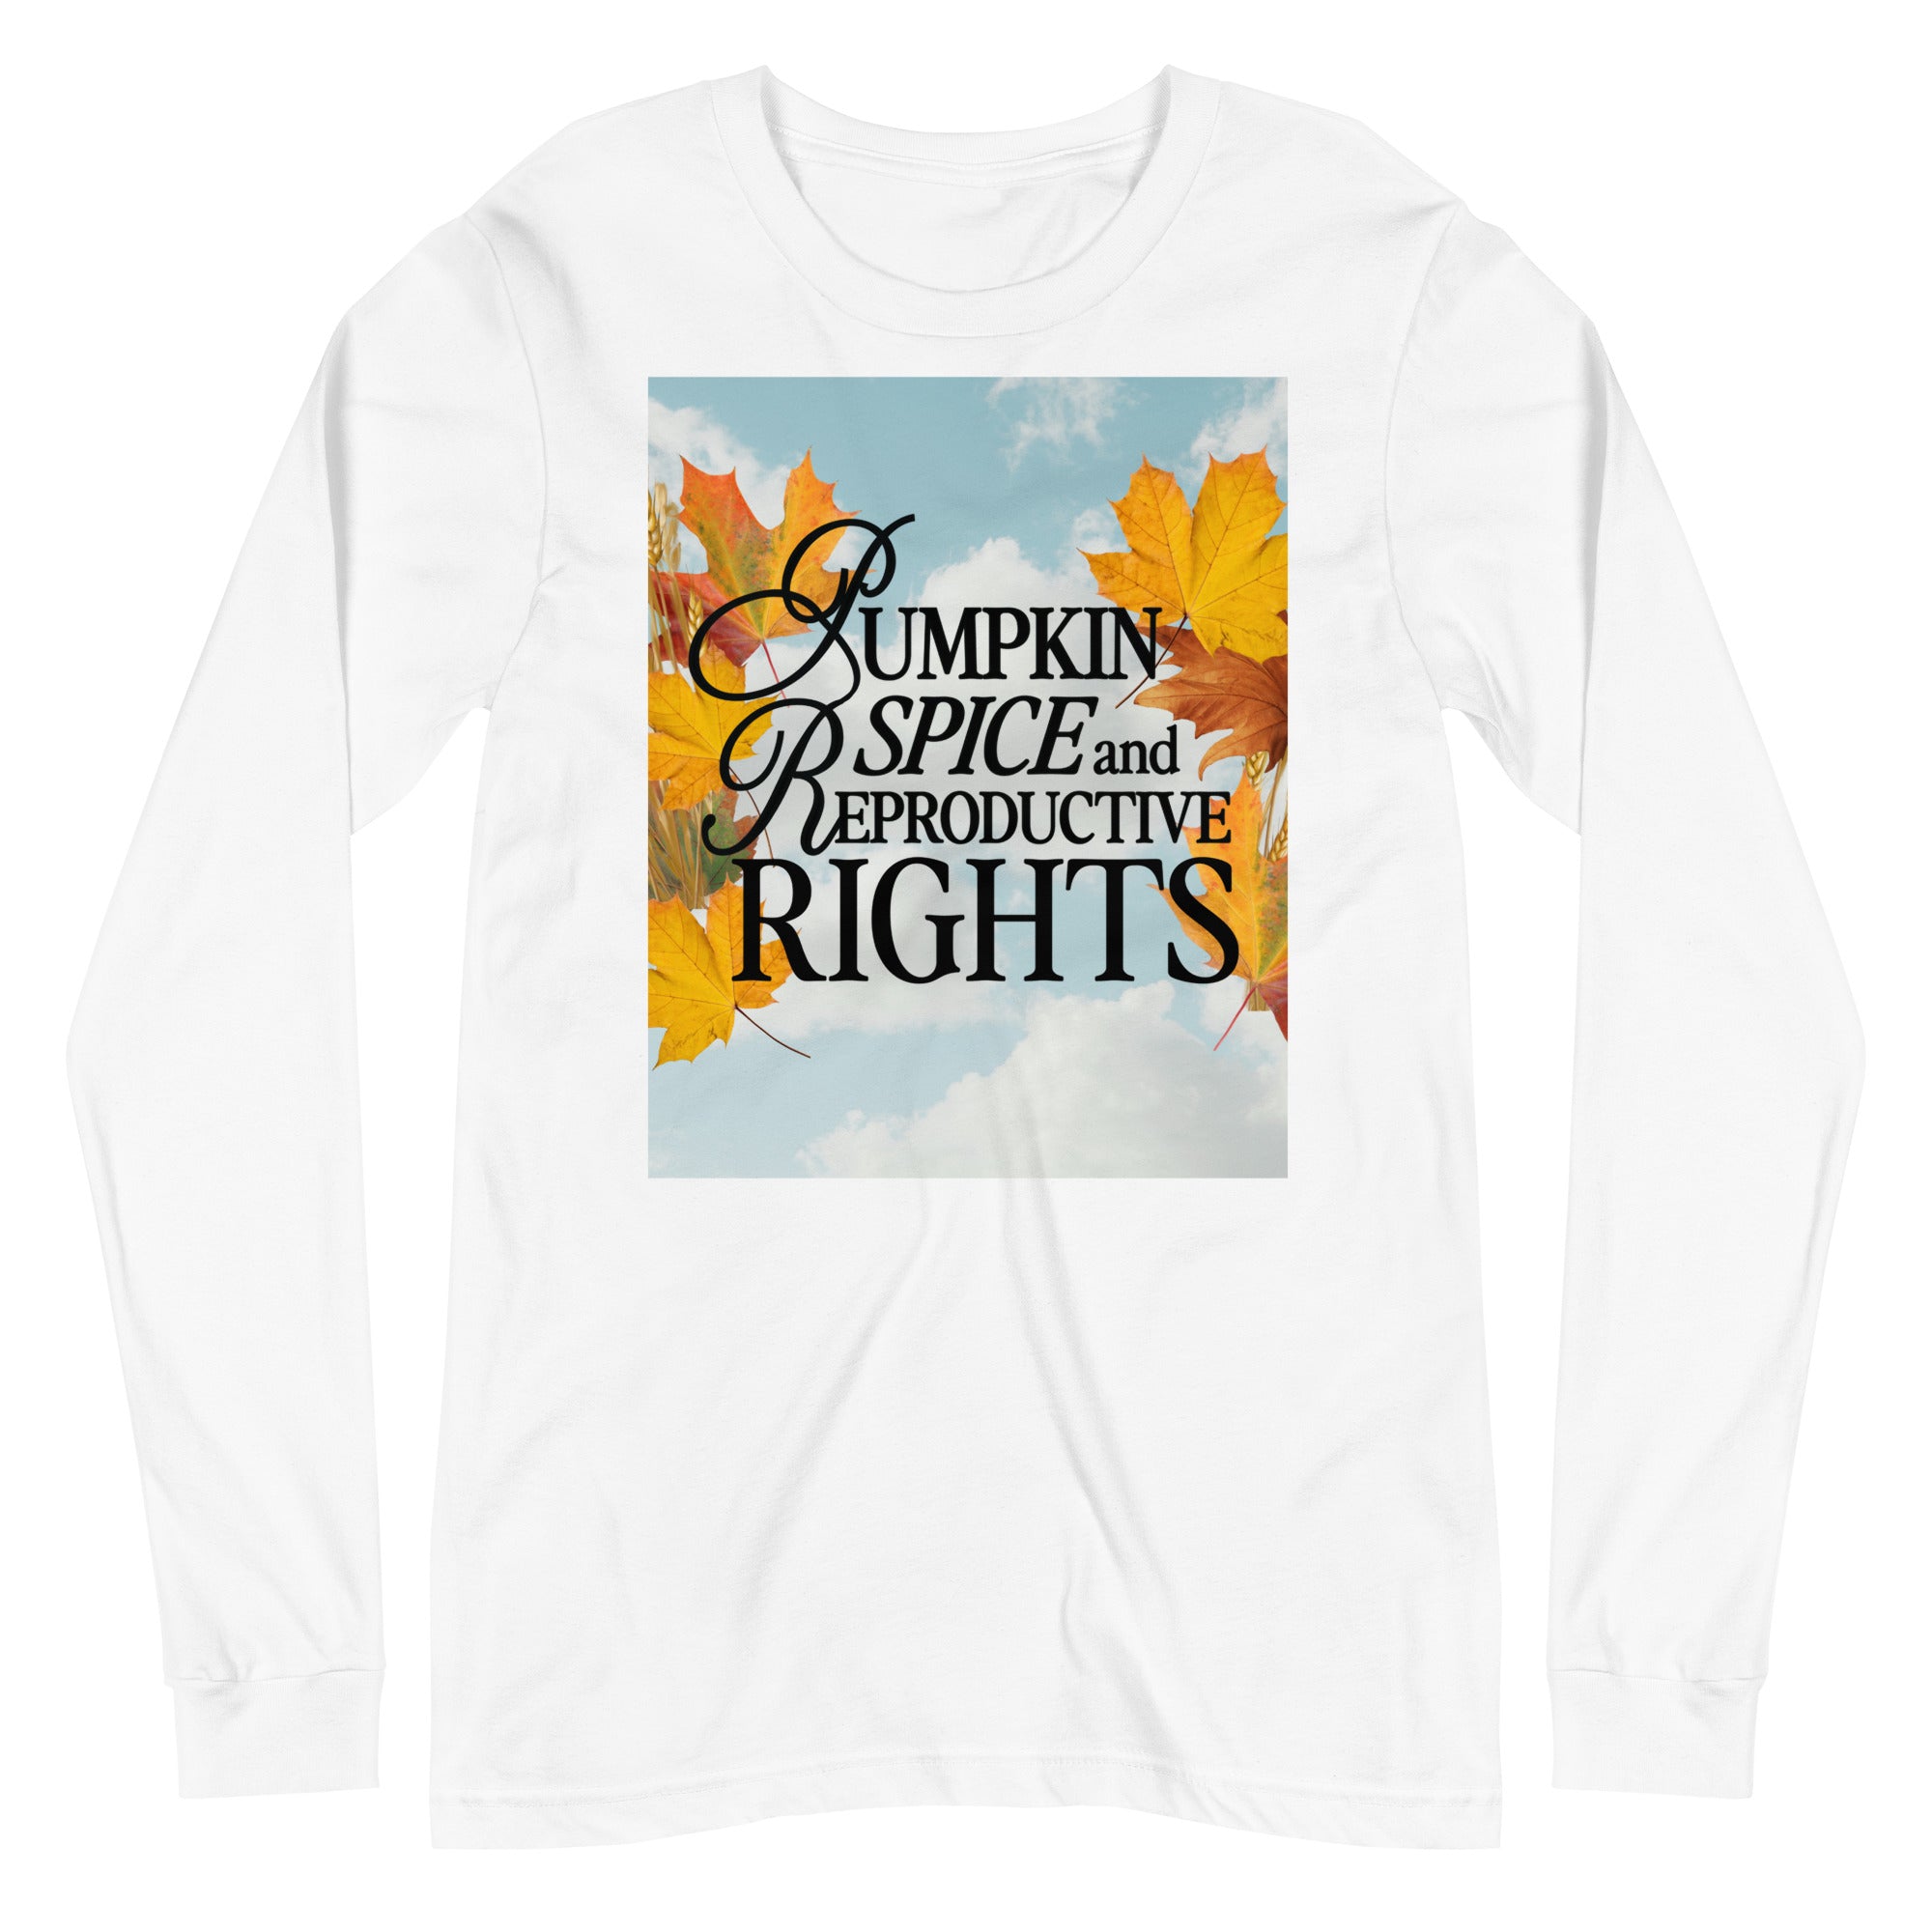 Pumpkin Spice & Reproductive Rights Long Sleeve Tee